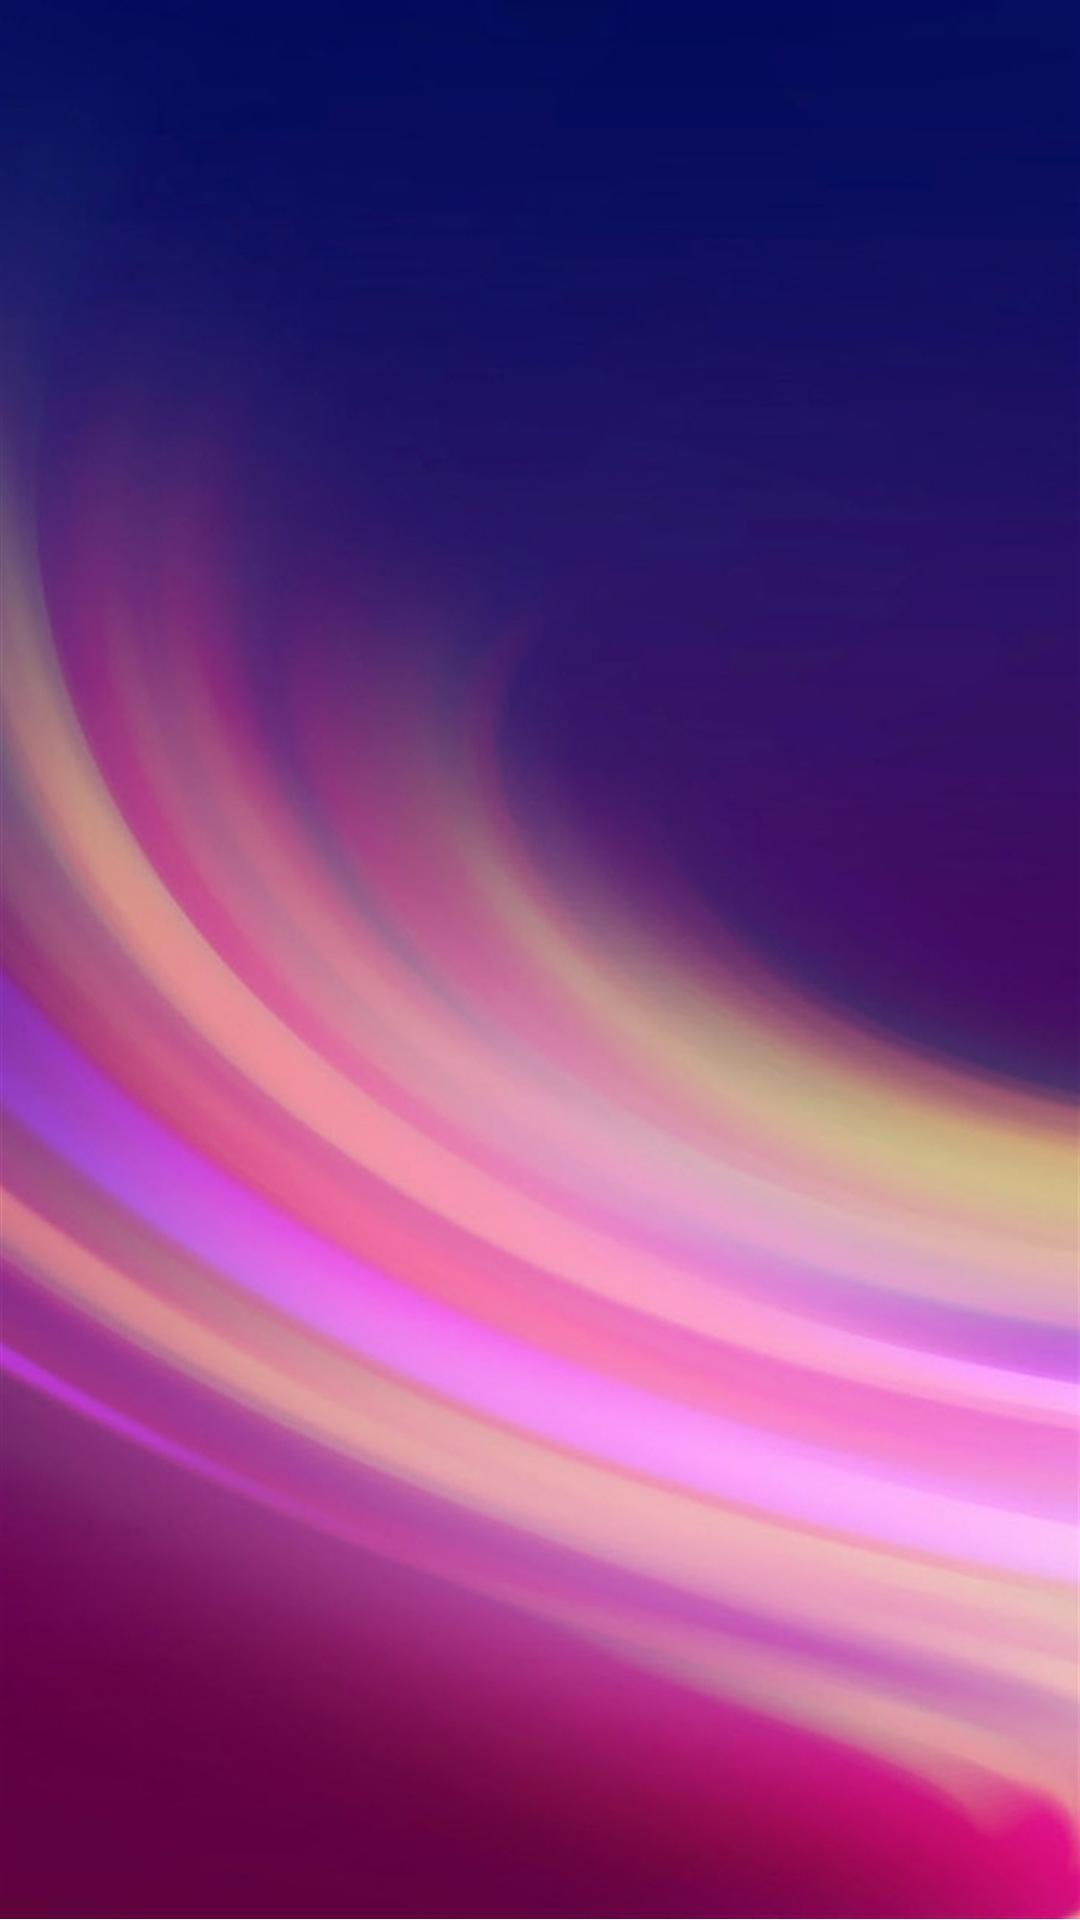 Abstract Purple Brush Waves Android Wallpaper free download